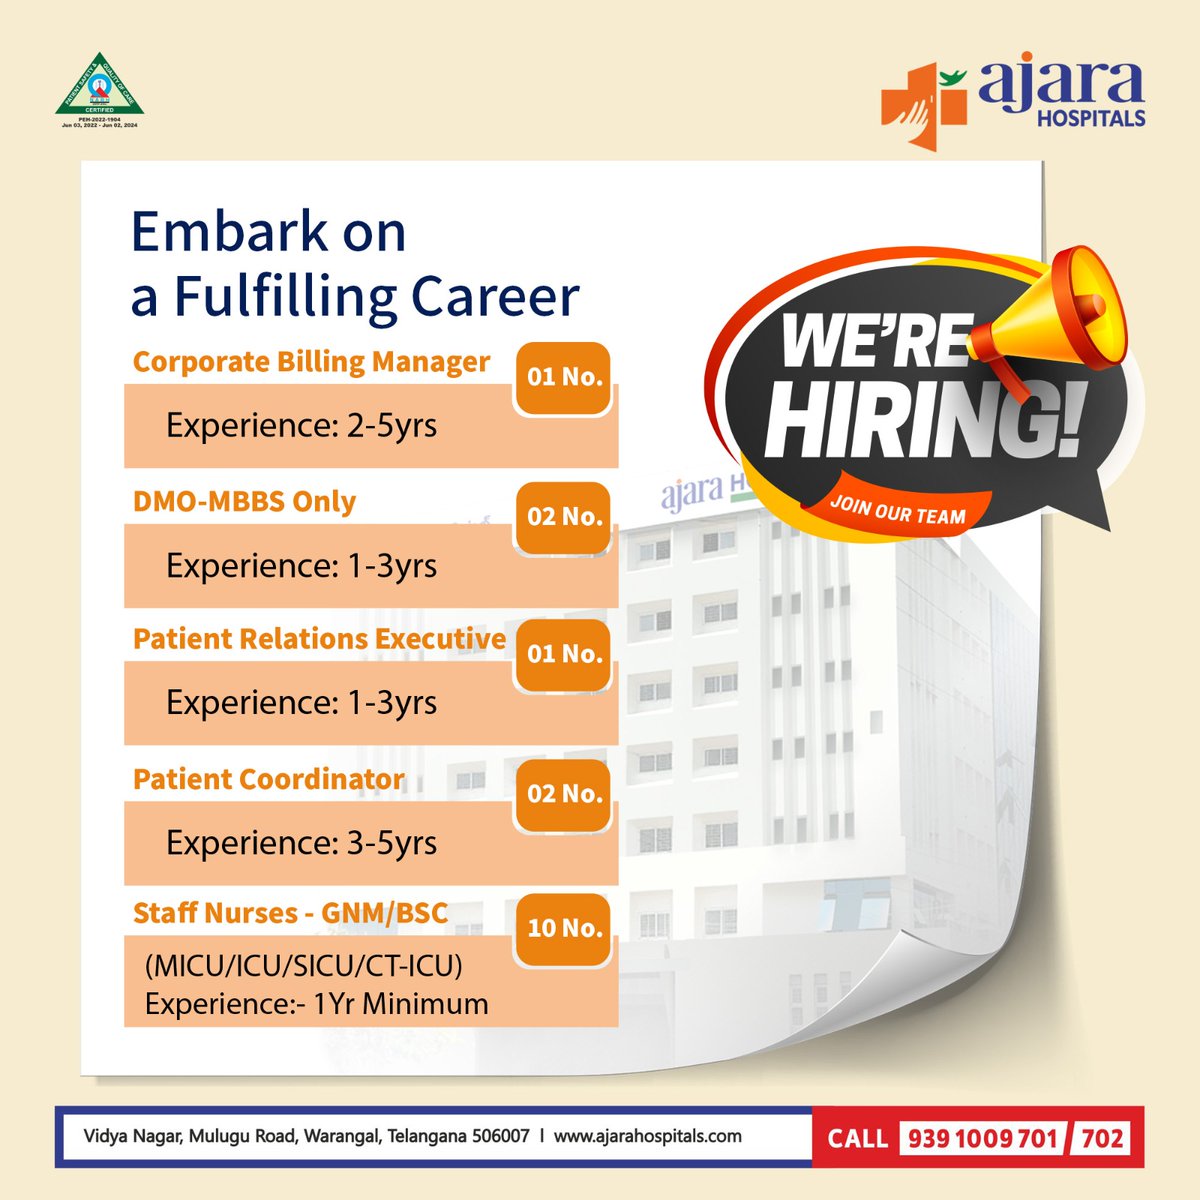 Join our team at Ajara Hospital! We're hiring for various positions

#NowHiring #JobOpening #JobOpportunity #JoinOurTeam #CareerOpportunity #JobSearch #JobPosting #Employment #HiringNow #WorkWithUs #ApplyNow #NewJob #JobVacancy #Recruitment2024 #Ajarahospital